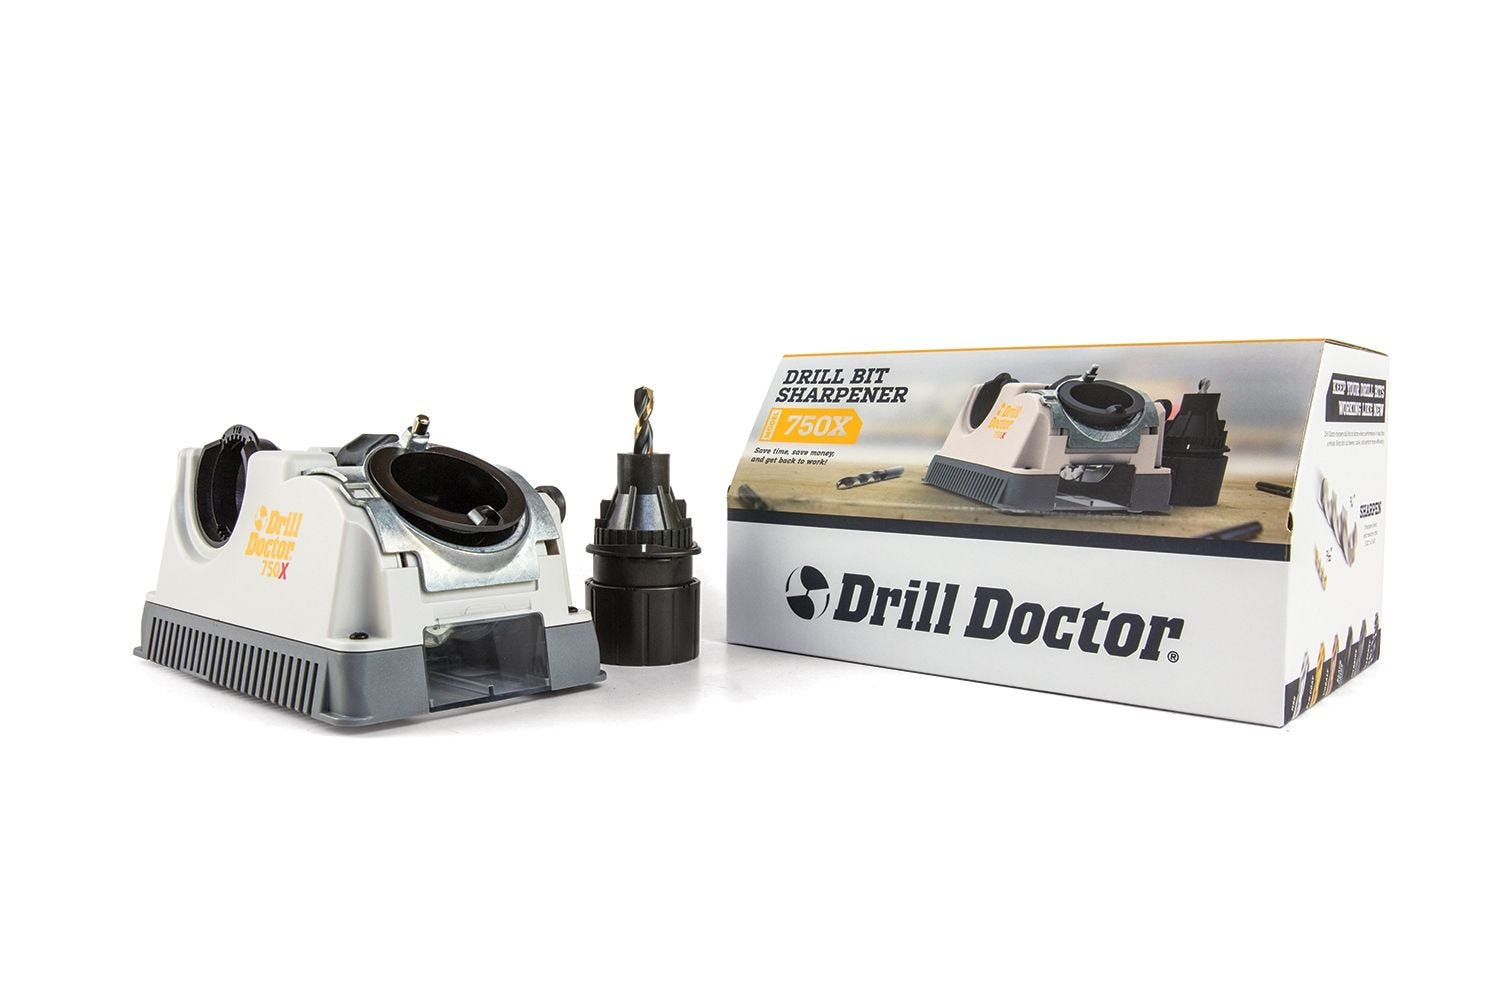 Drill Doctor 750X Drill Bit Sharpener | Rockler Woodworking and Hardware